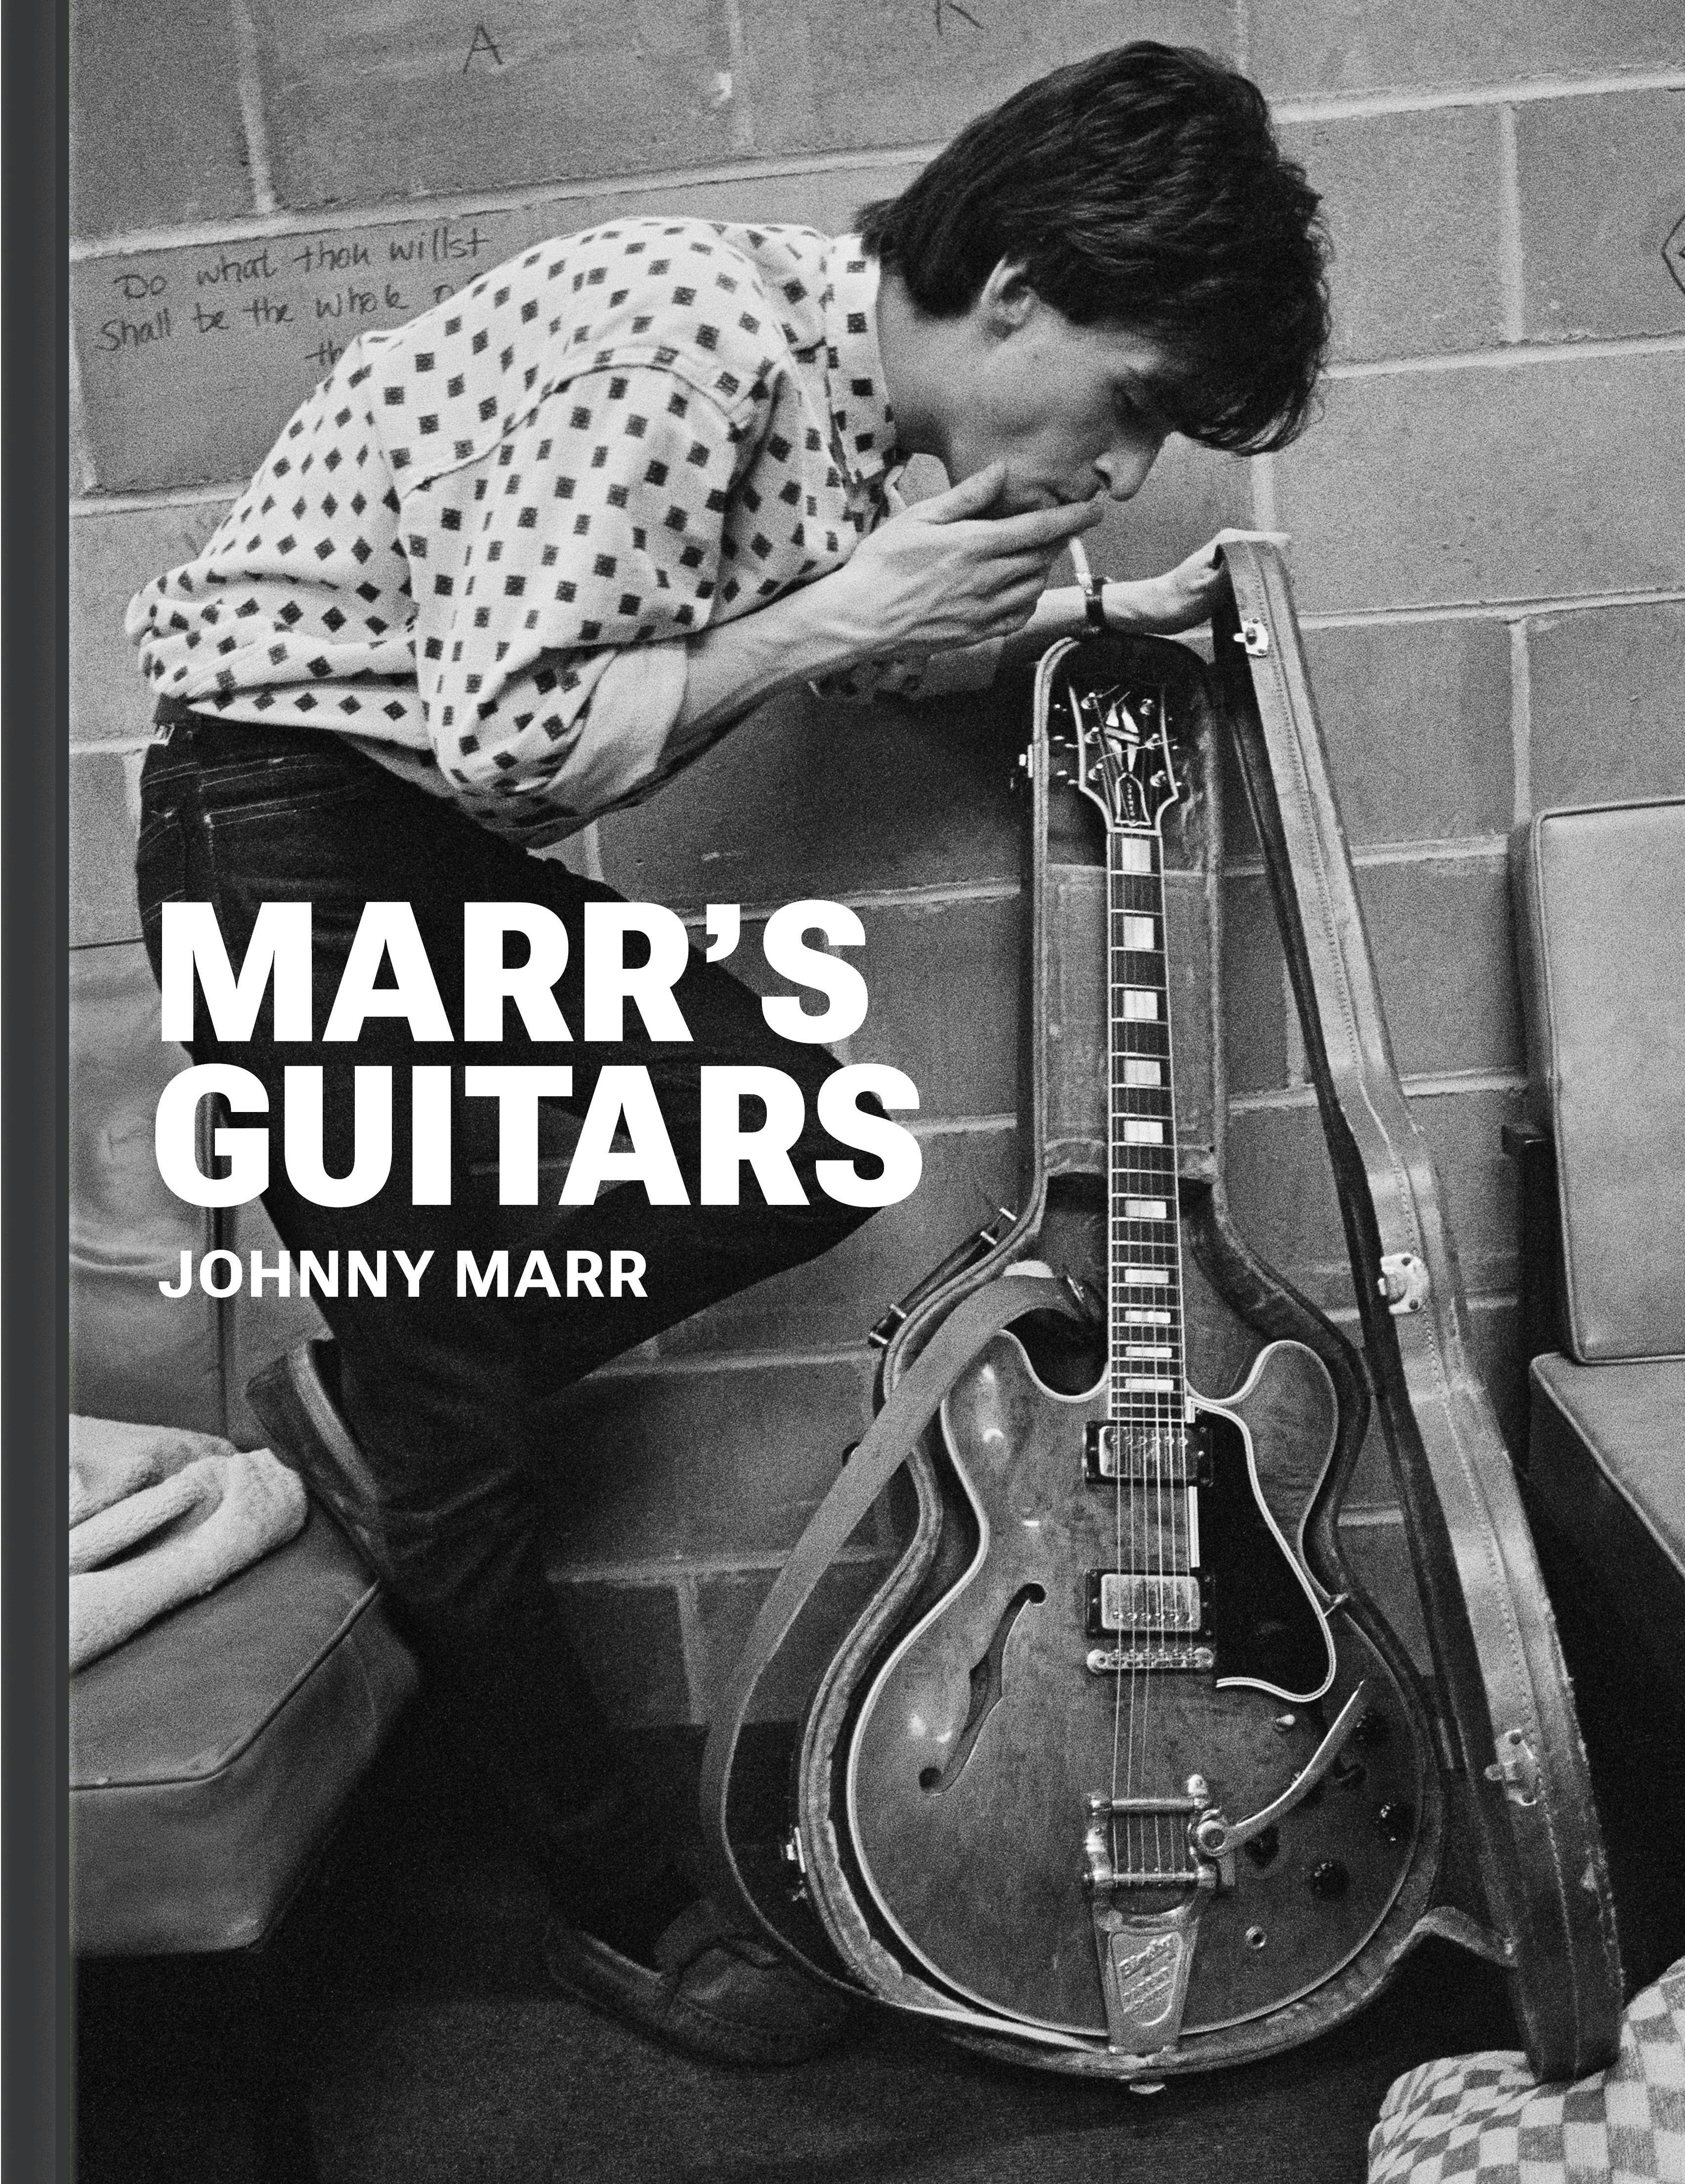 Copyright © 2023 by Johnny Marr. Printed courtesy of Dey Street Books, an imprint of HarperCollins Publishers.